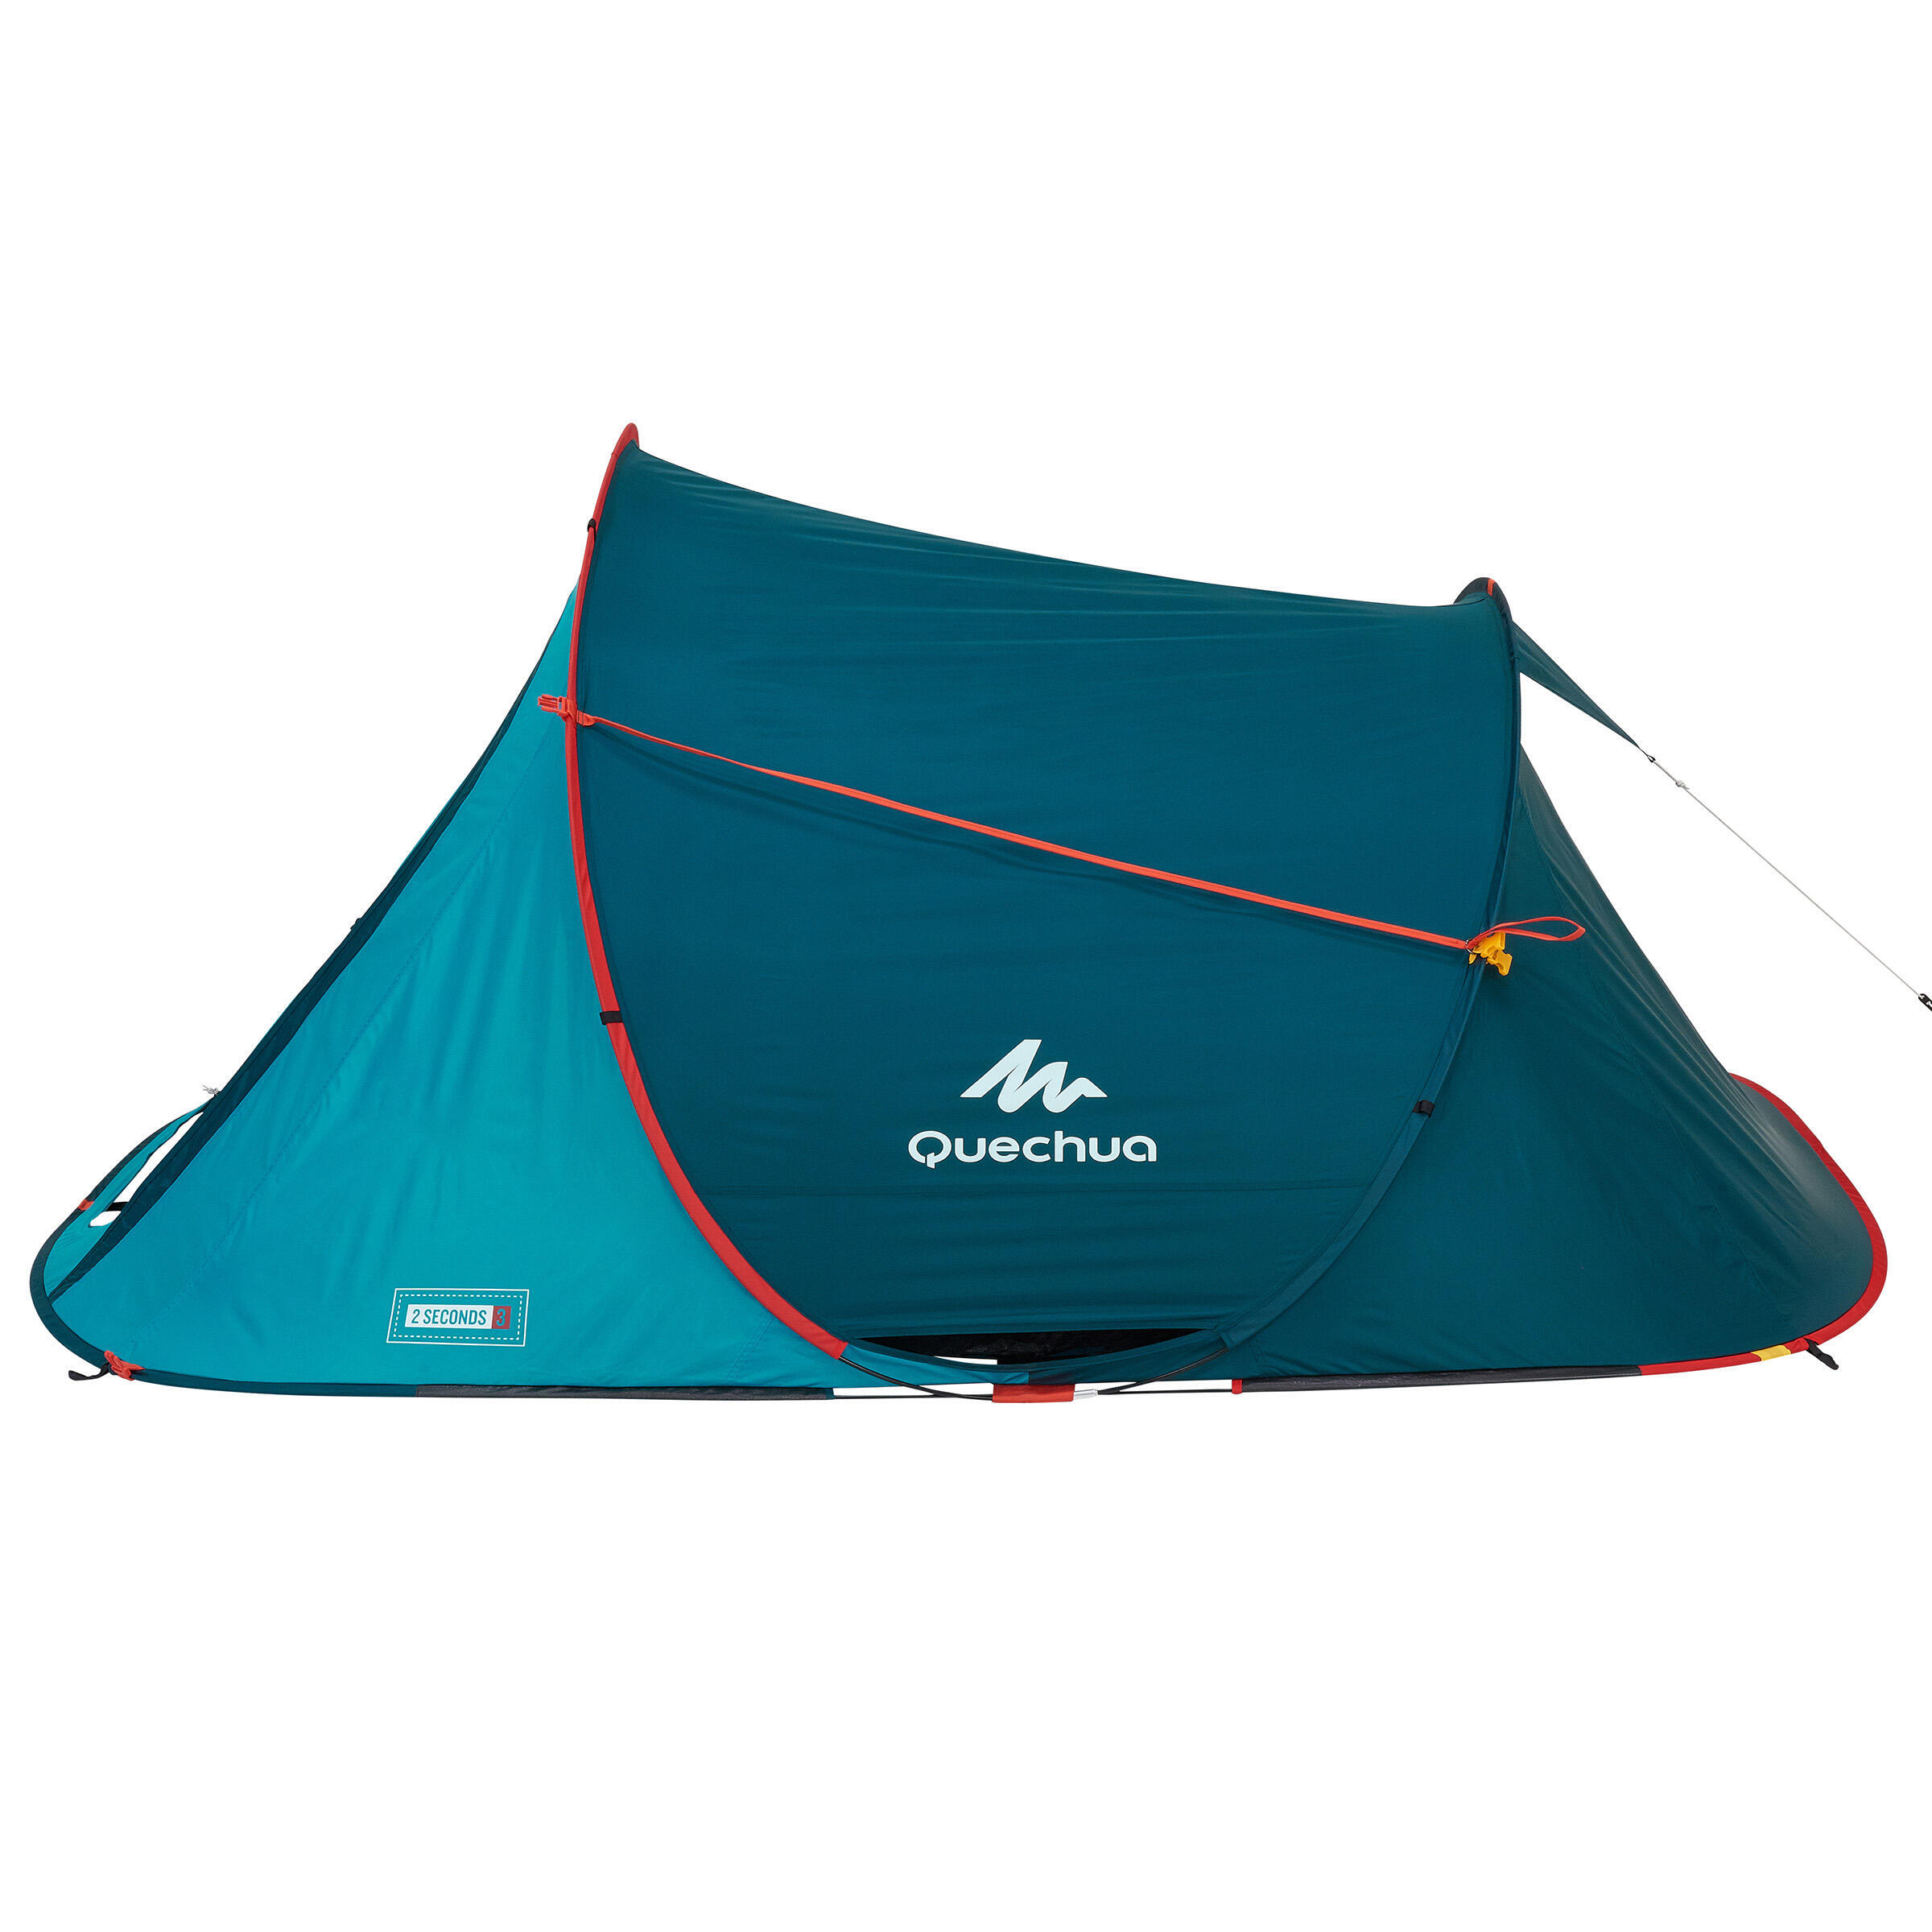 Camping tent - 2 SECONDS - 3-person 25/26